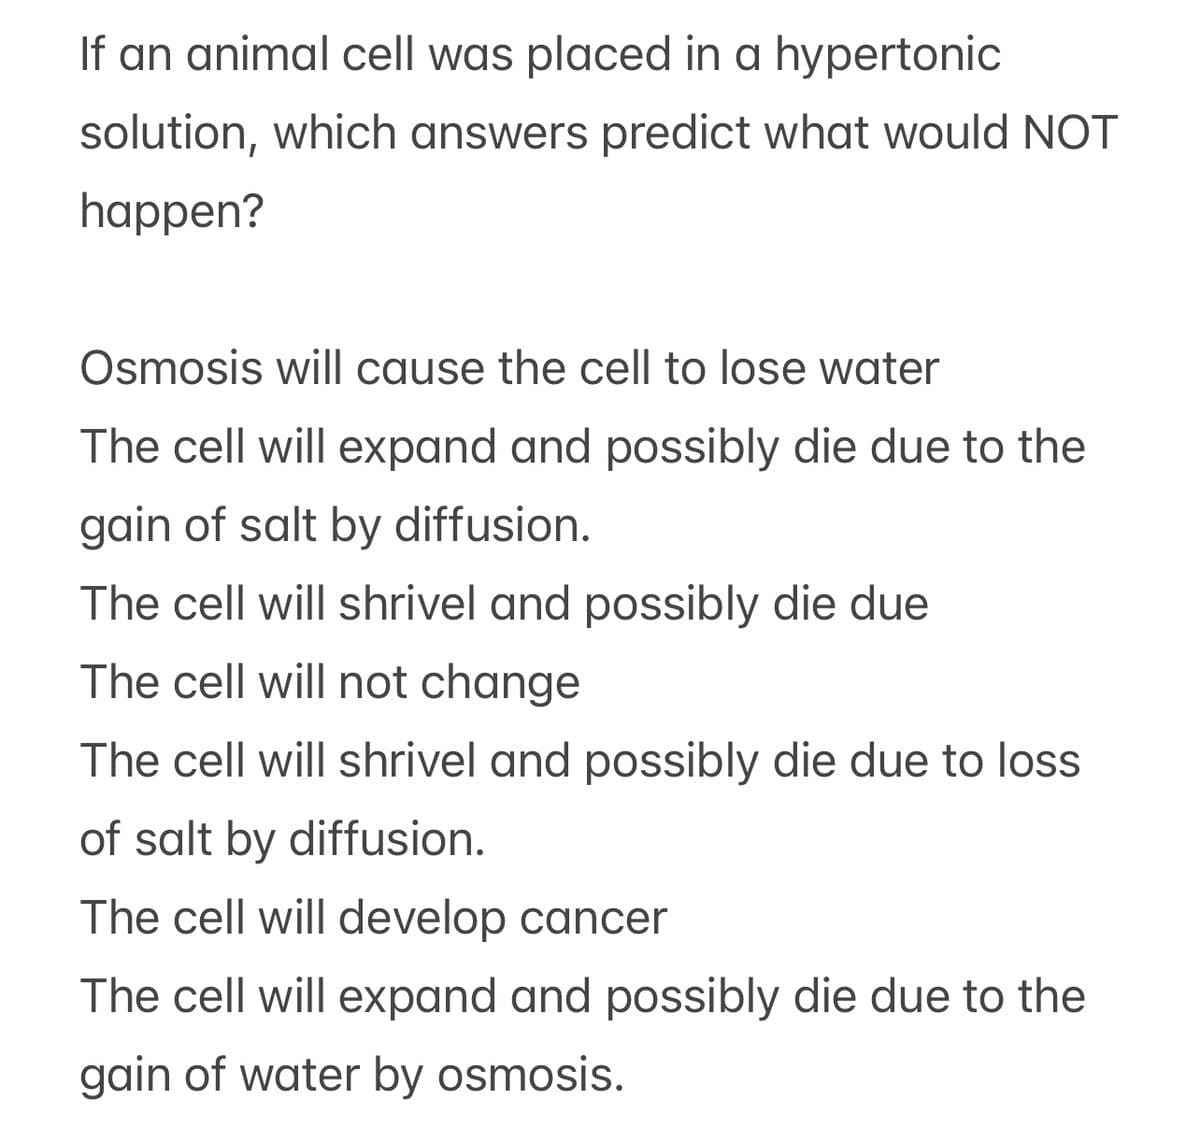 If an animal cell was placed in a hypertonic
solution, which answers predict what would NOT
happen?
Osmosis will cause the cell to lose water
The cell will expand and possibly die due to the
gain of salt by diffusion.
The cell will shrivel and possibly die due
The cell will not change
The cell will shrivel and possibly die due to loss
of salt by diffusion.
The cell will develop cancer
The cell will expand and possibly die due to the
gain of water by osmosis.